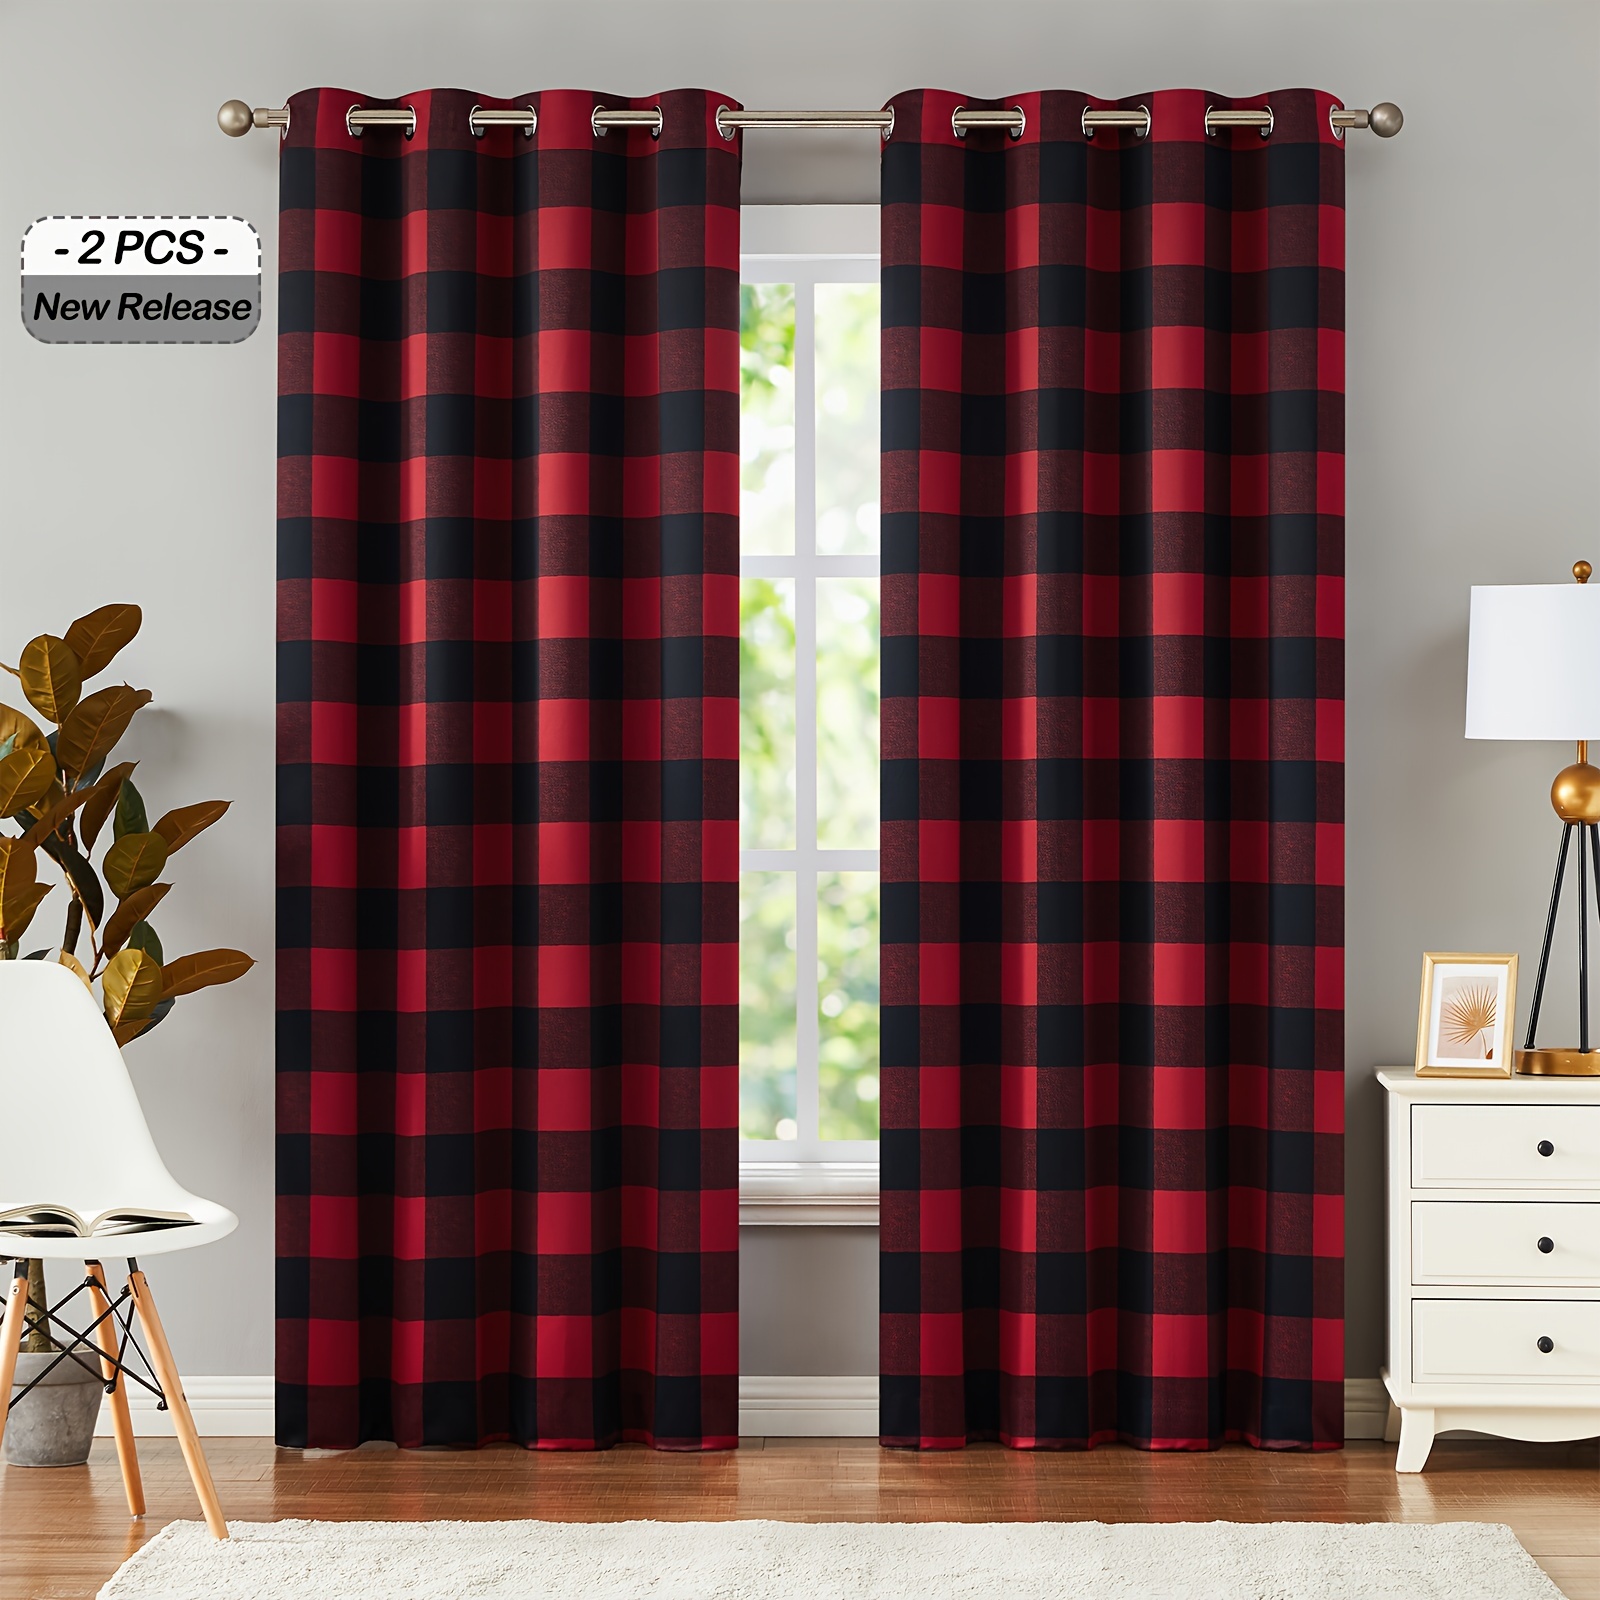 

2pcs Buffalo Check Plaid Blackout Curtains For Bedroom, Living Room Thermal Insulated Room Darkening Noise Reducing Grommet Drapes